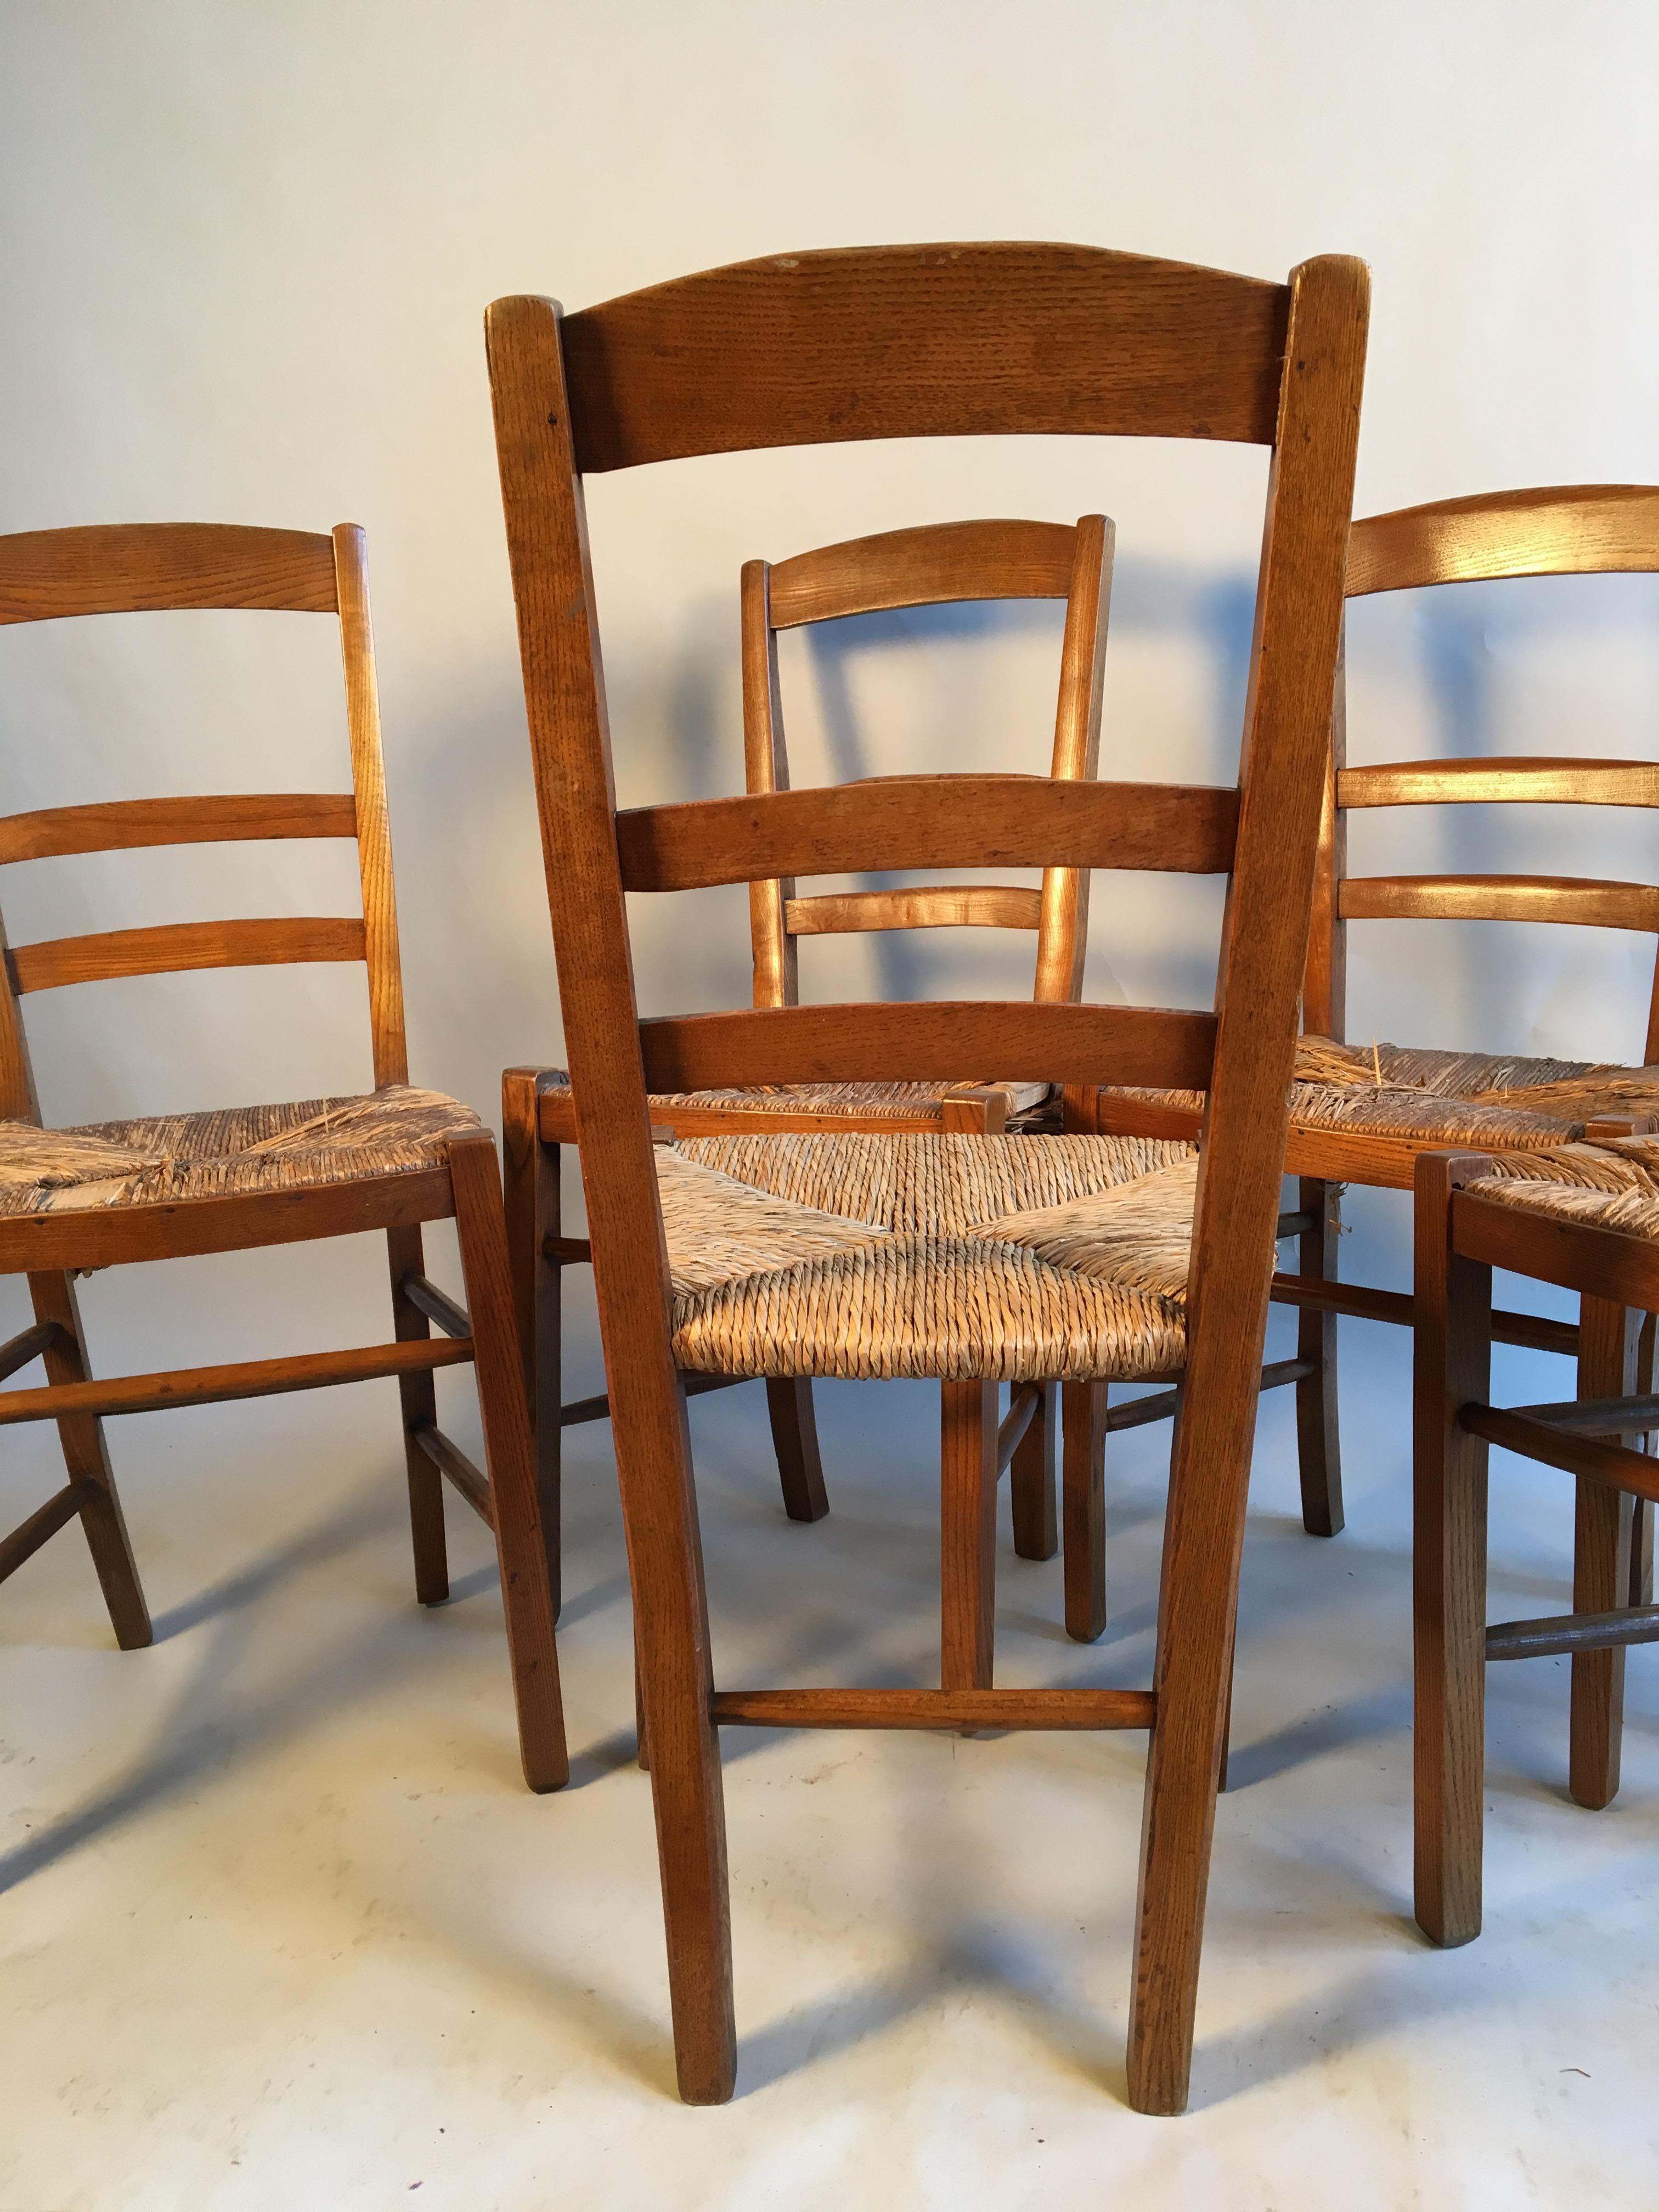 Elm Set of 6 French Country Ladder Back Chairs, Mid-19th Century